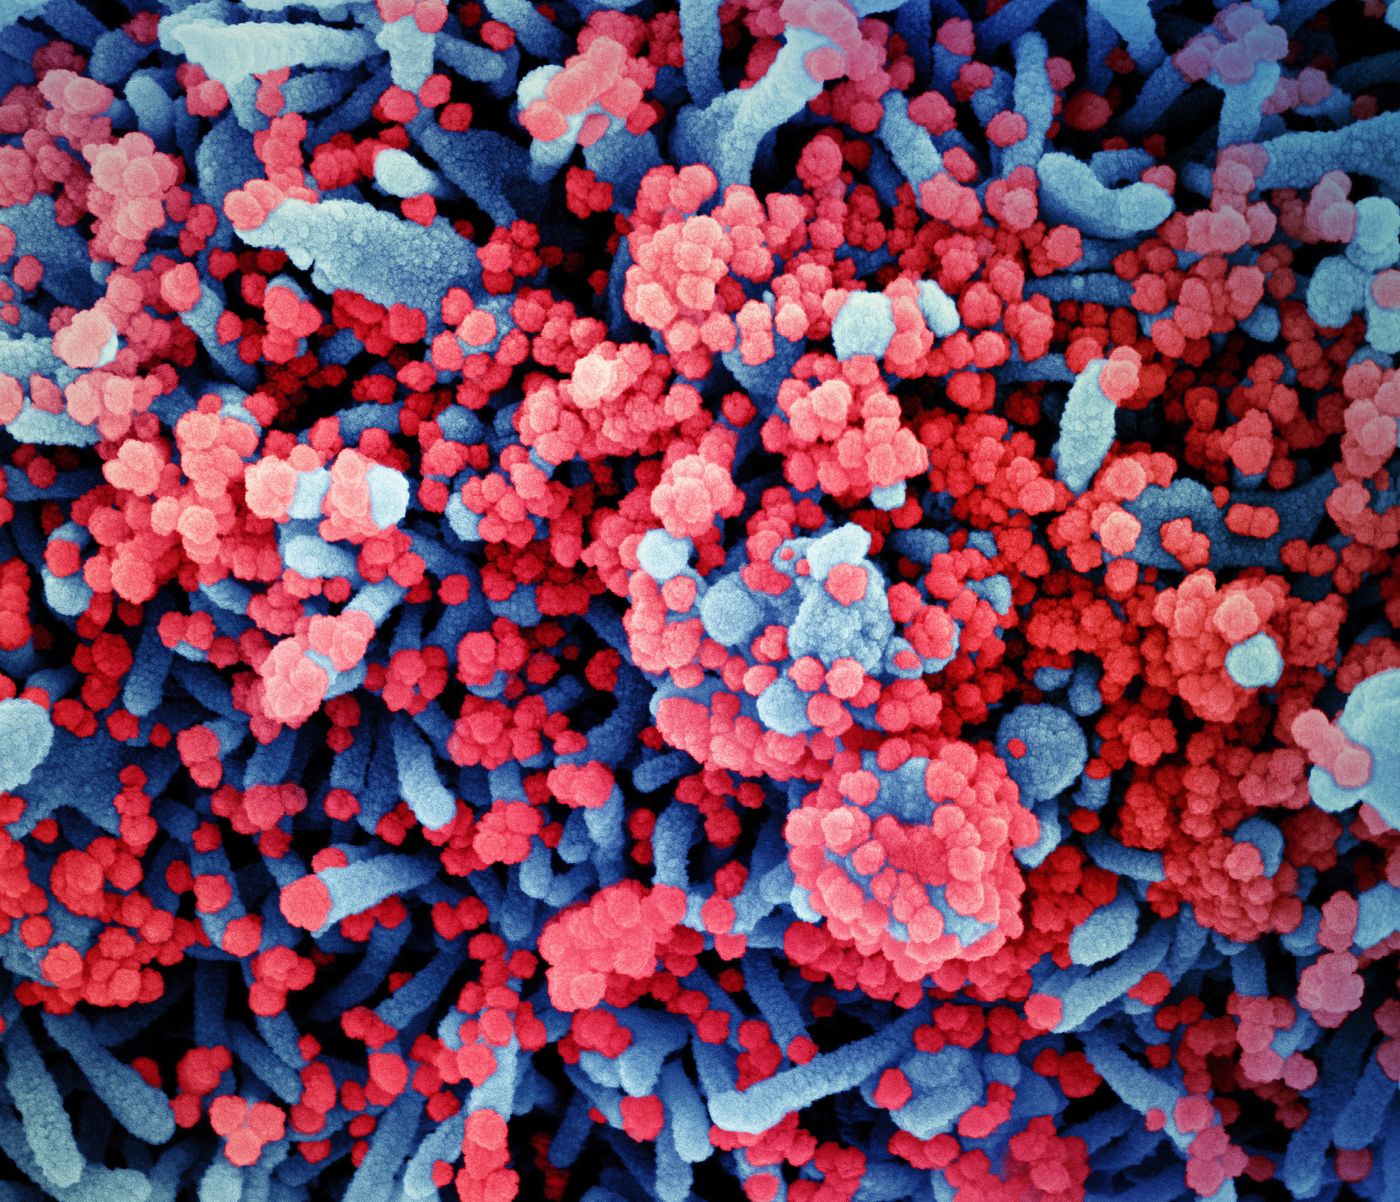 Colorized scanning electron micrograph of a cell (blue) heavily infected with SARS-CoV-2 virus particles (red), isolated from a patient sample. Image captured at the NIAID Integrated Research Facility (IRF) in Fort Detrick, Maryland. / Credit: NIAID